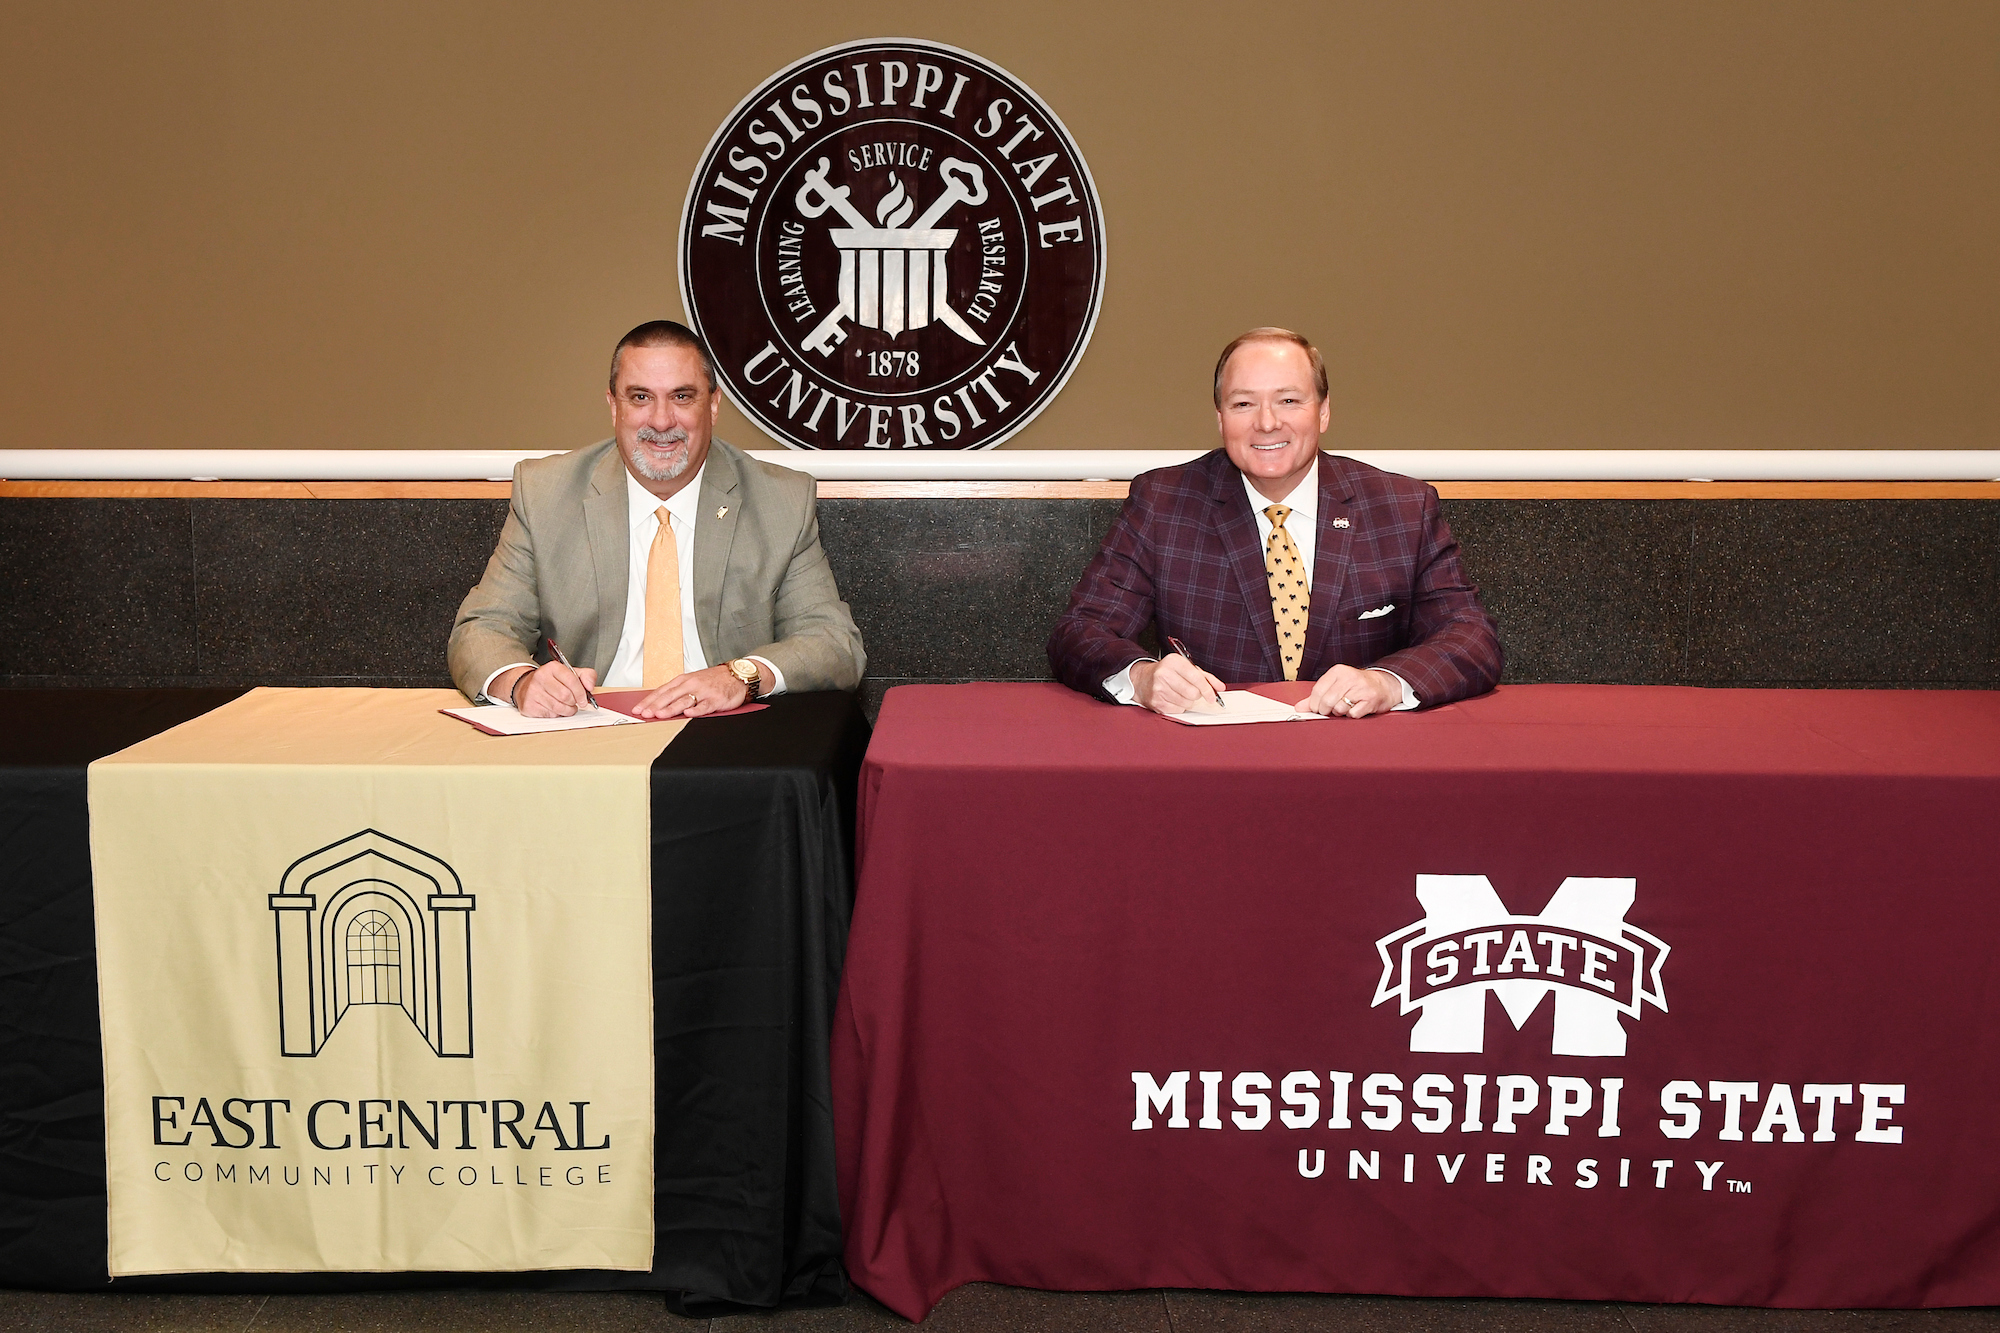 MSU Photo ID: East Central Community College President Billy Stewart and MSU President Mark E. Keenum sign a memorandum of understanding Wednesday [Feb. 26] to formalize a pathway for technical education students at ECCC to complete MSU’s new Bachelor of 